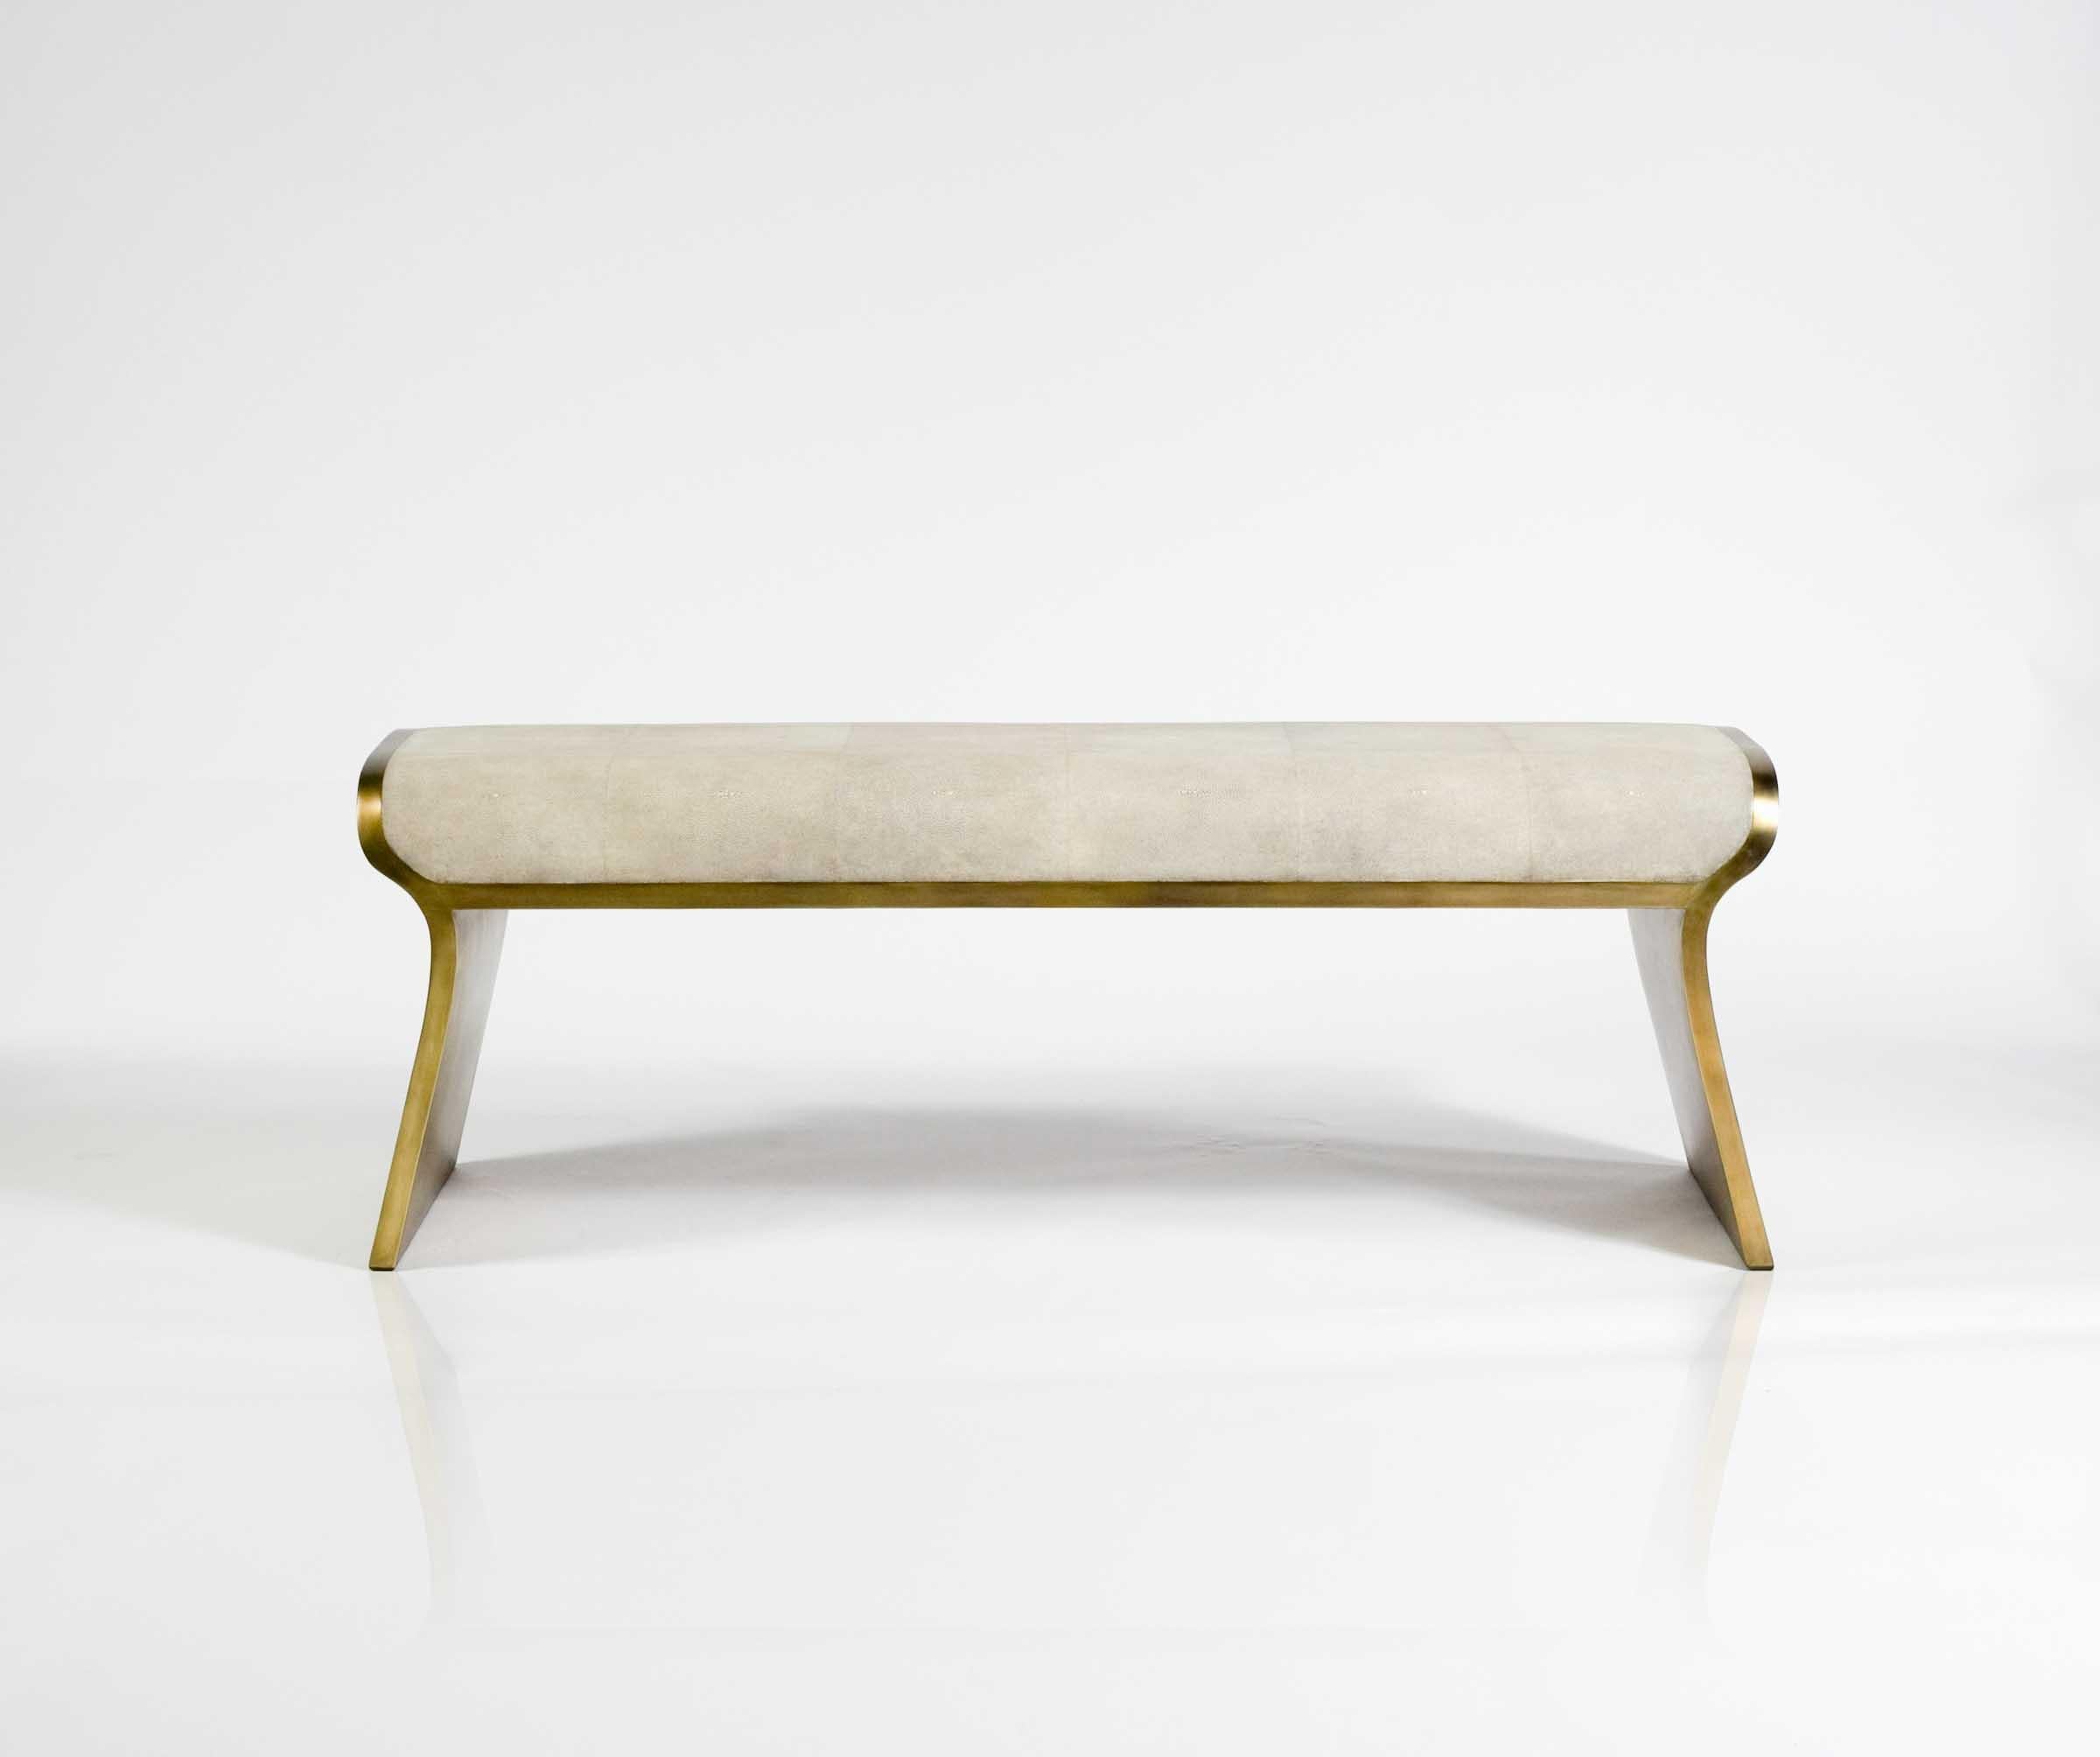 Contemporary Dandy Day Bench Upholstered in Green Velvet with Brass by Kifu Paris For Sale